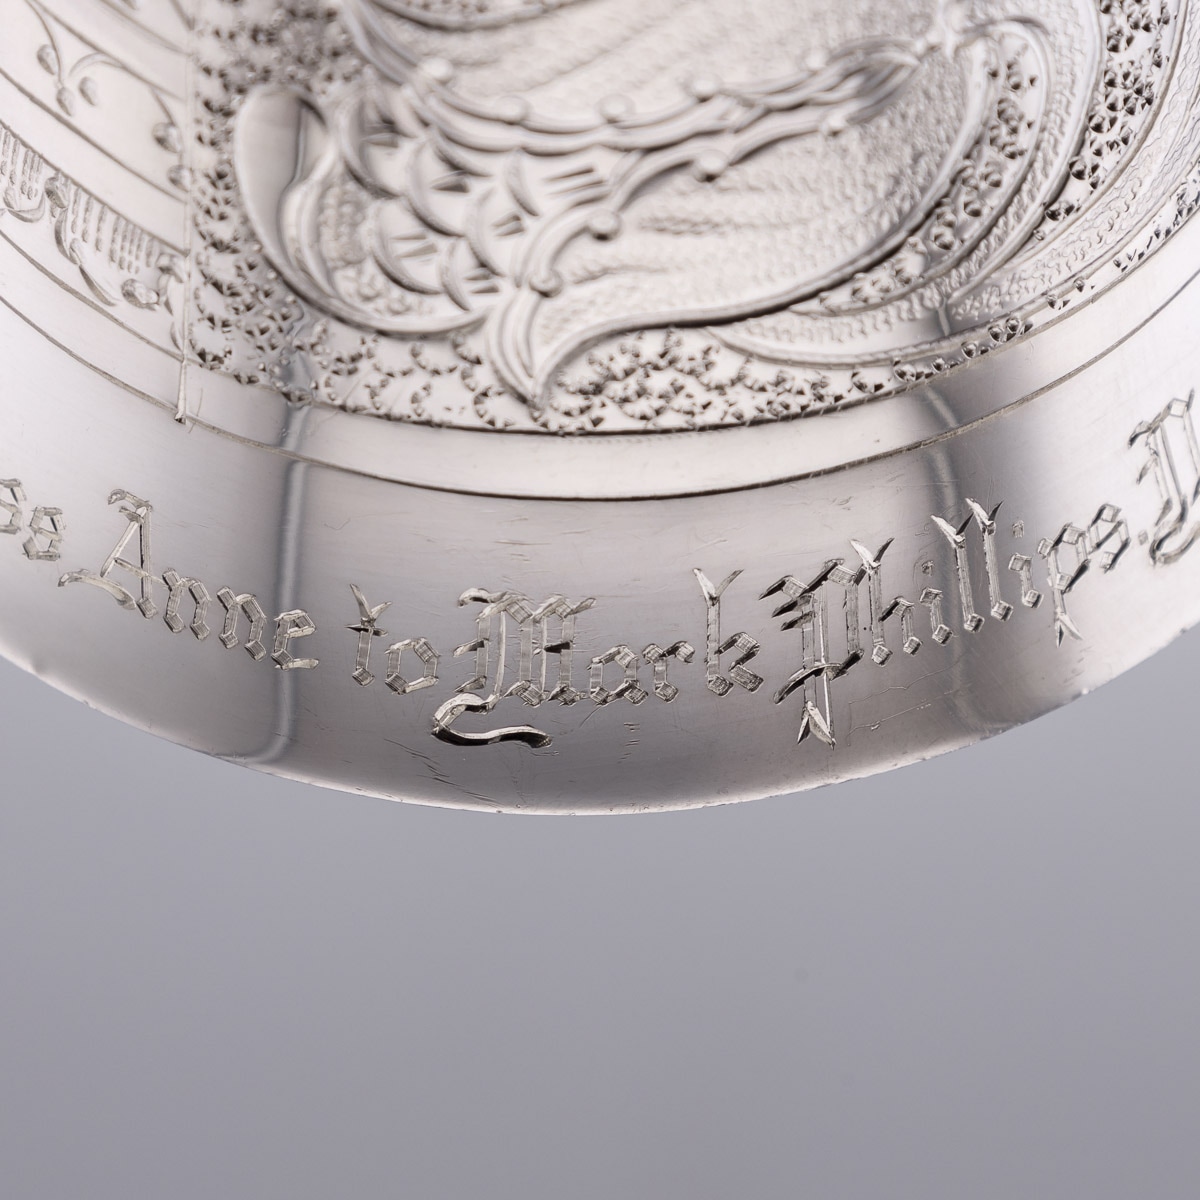 A ROYAL WEDDING SOLID STERLING SILVER NOVELTY WAGER CUP, LONDON, C. 1973 - Image 21 of 23